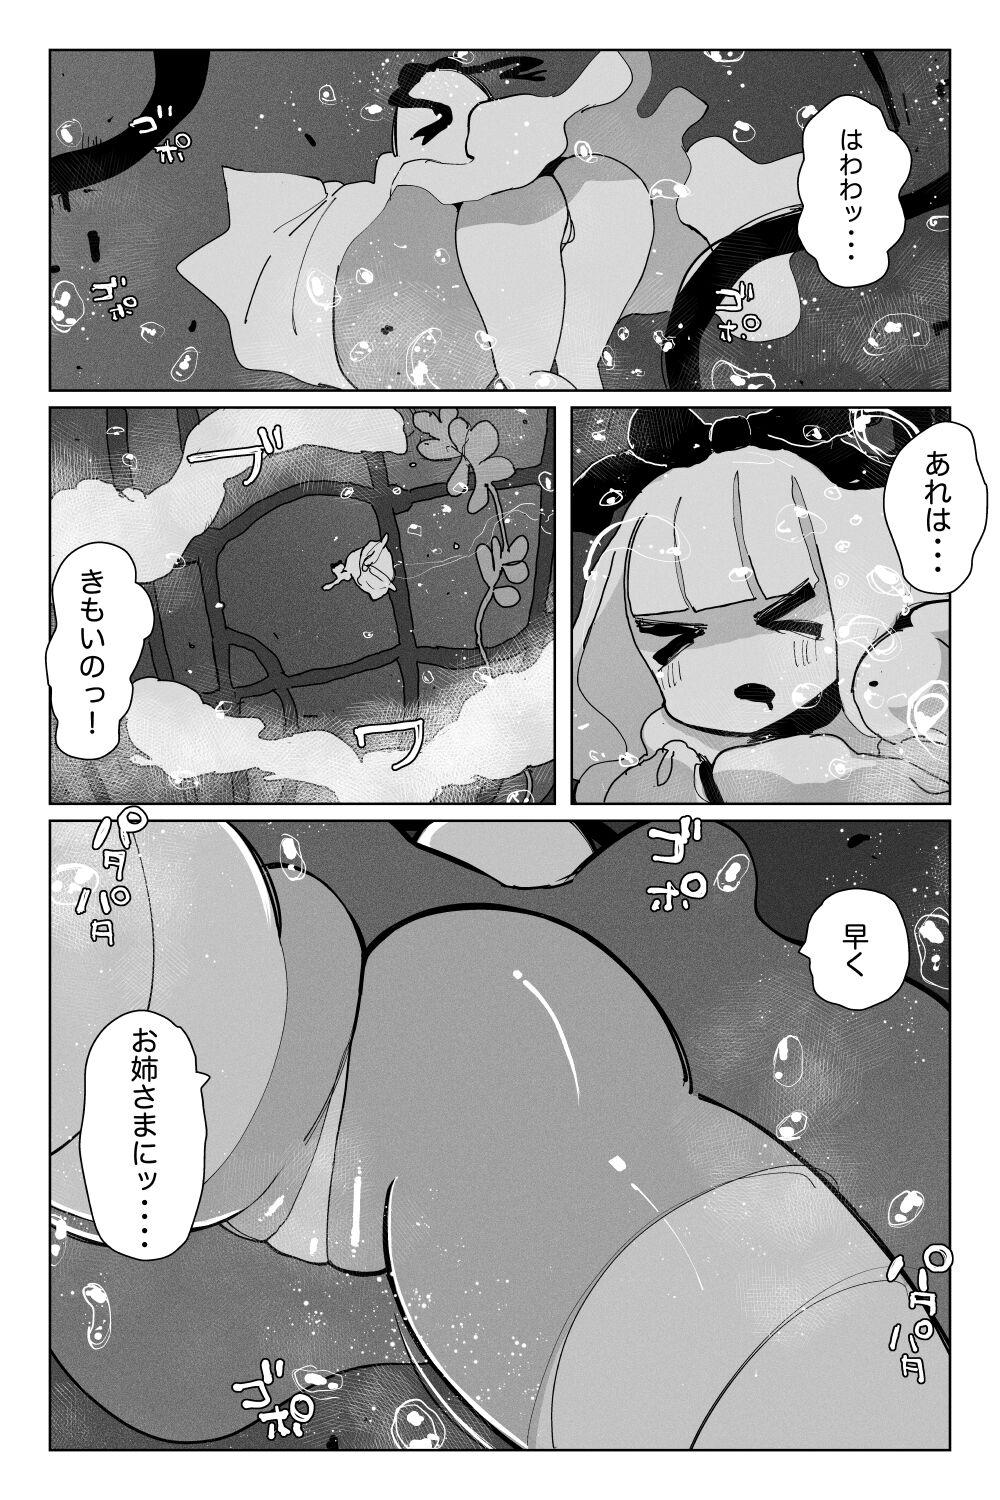 Coroa #03MarineMirage + Bad end... - Original Married - Page 3